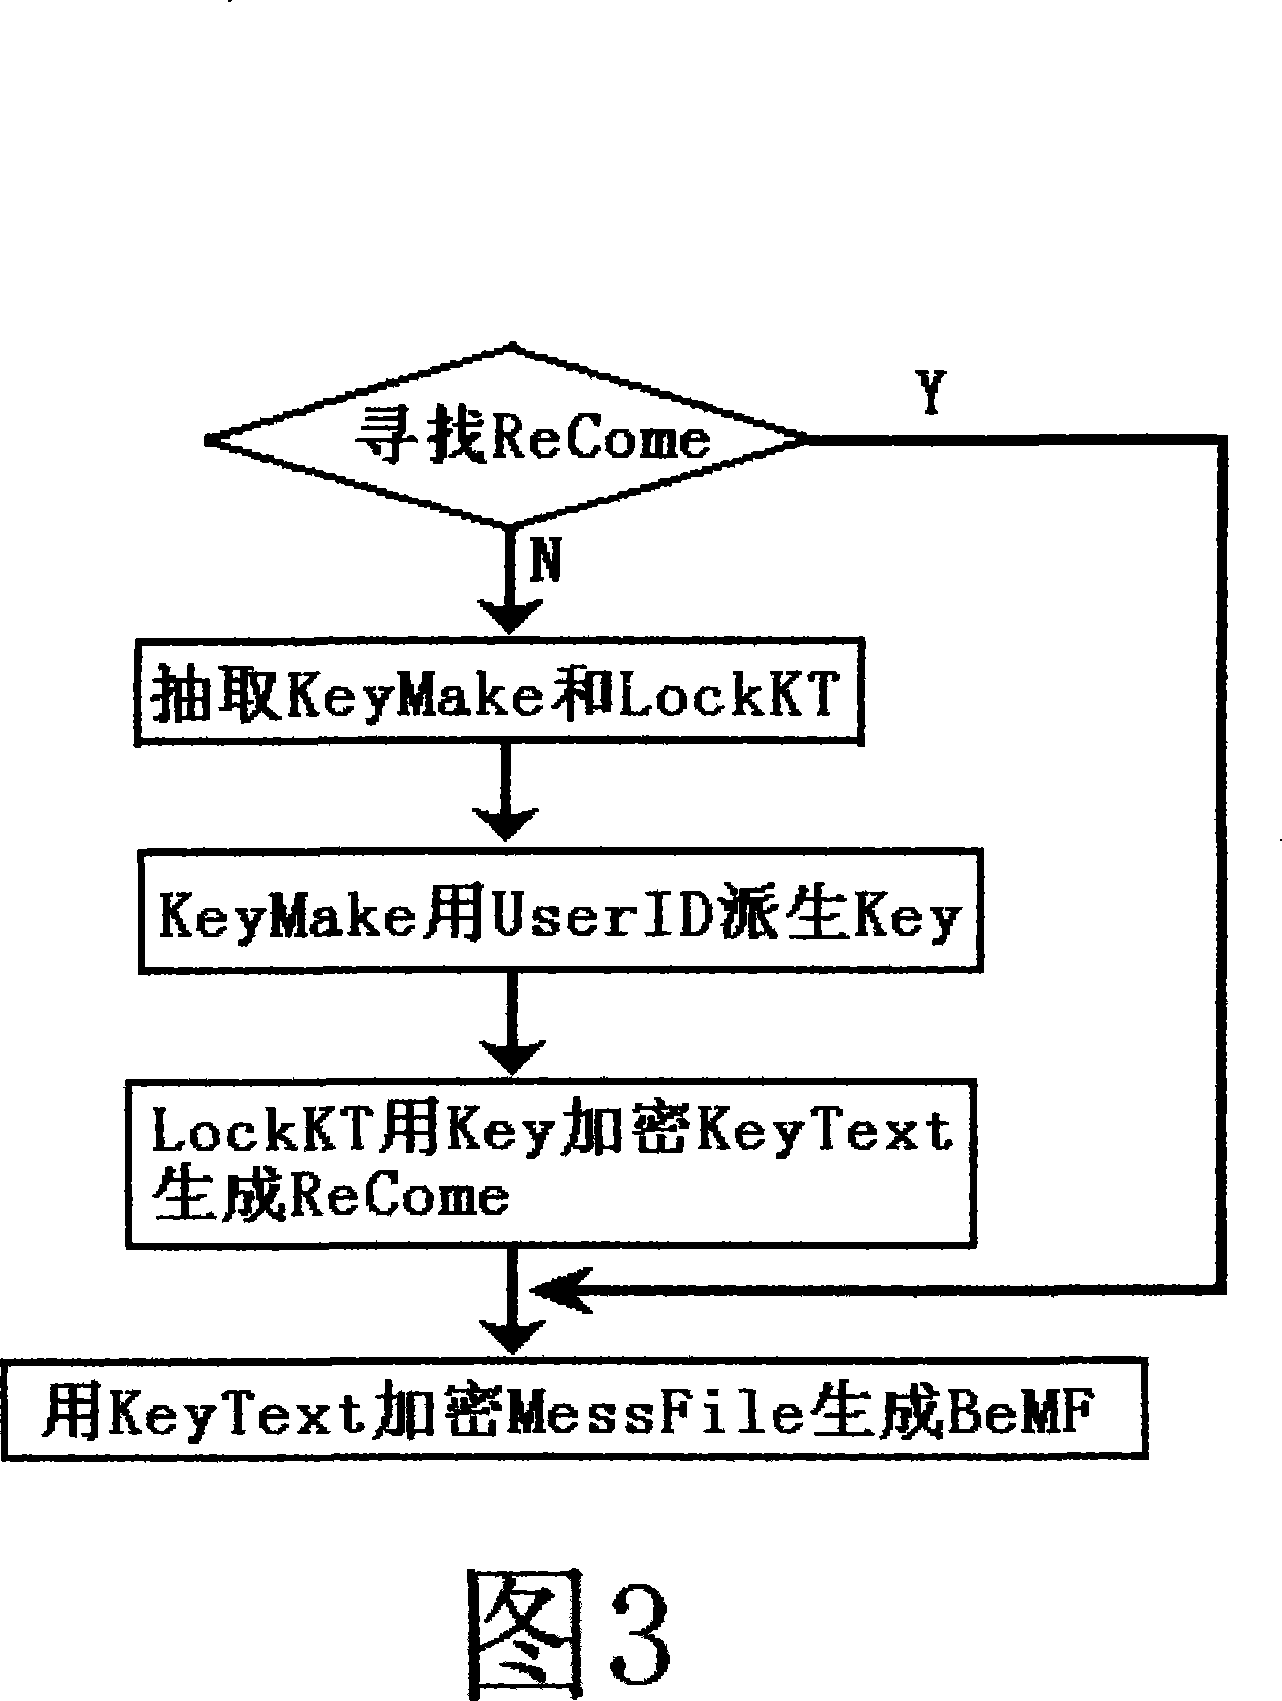 Enciphering method for combining accidental enciphering and exhaust algorithm decipher